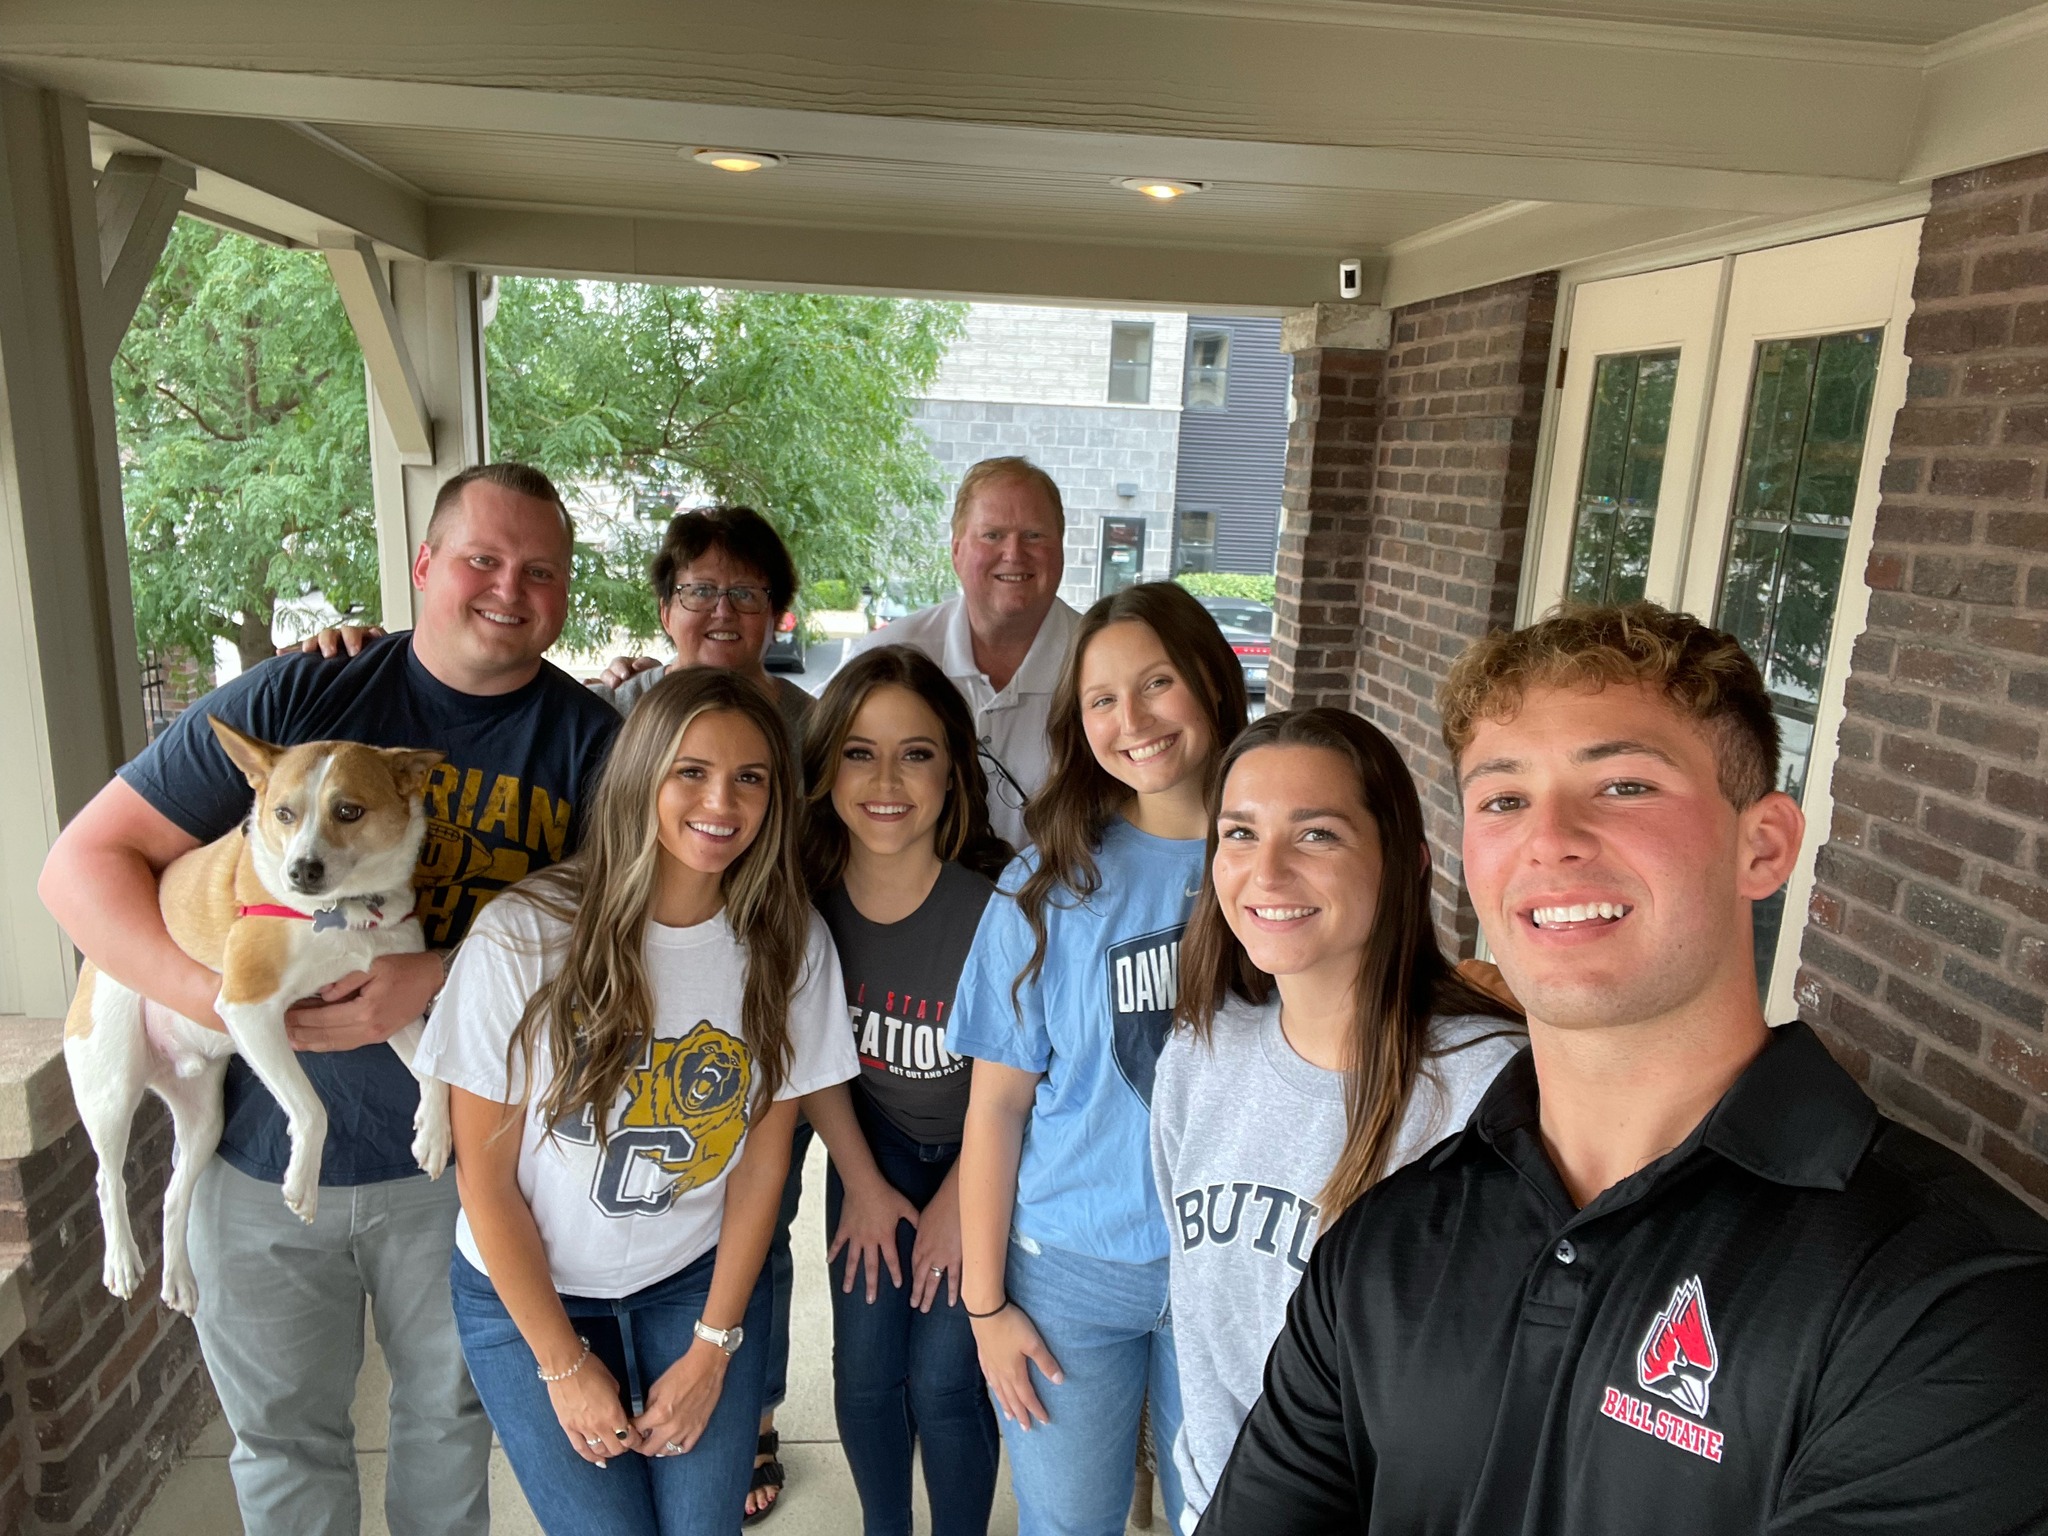 A cheerful group of eight with a dog, wearing collegiate apparel, posing for a selfie on a porch